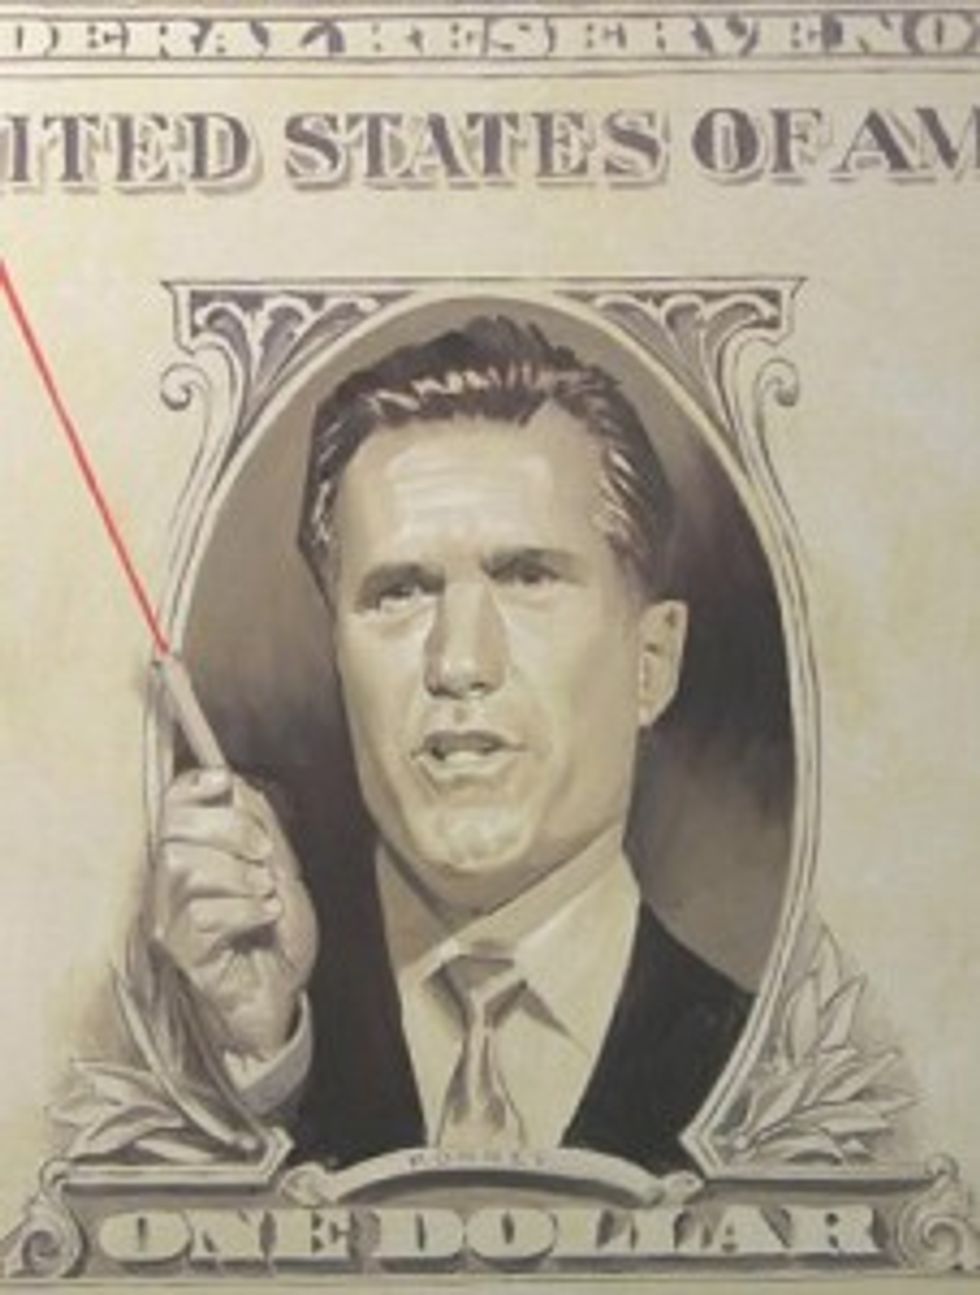 Michigan Showers Mitt Romney With Almost $8 Million Worth of Speech In Single Day